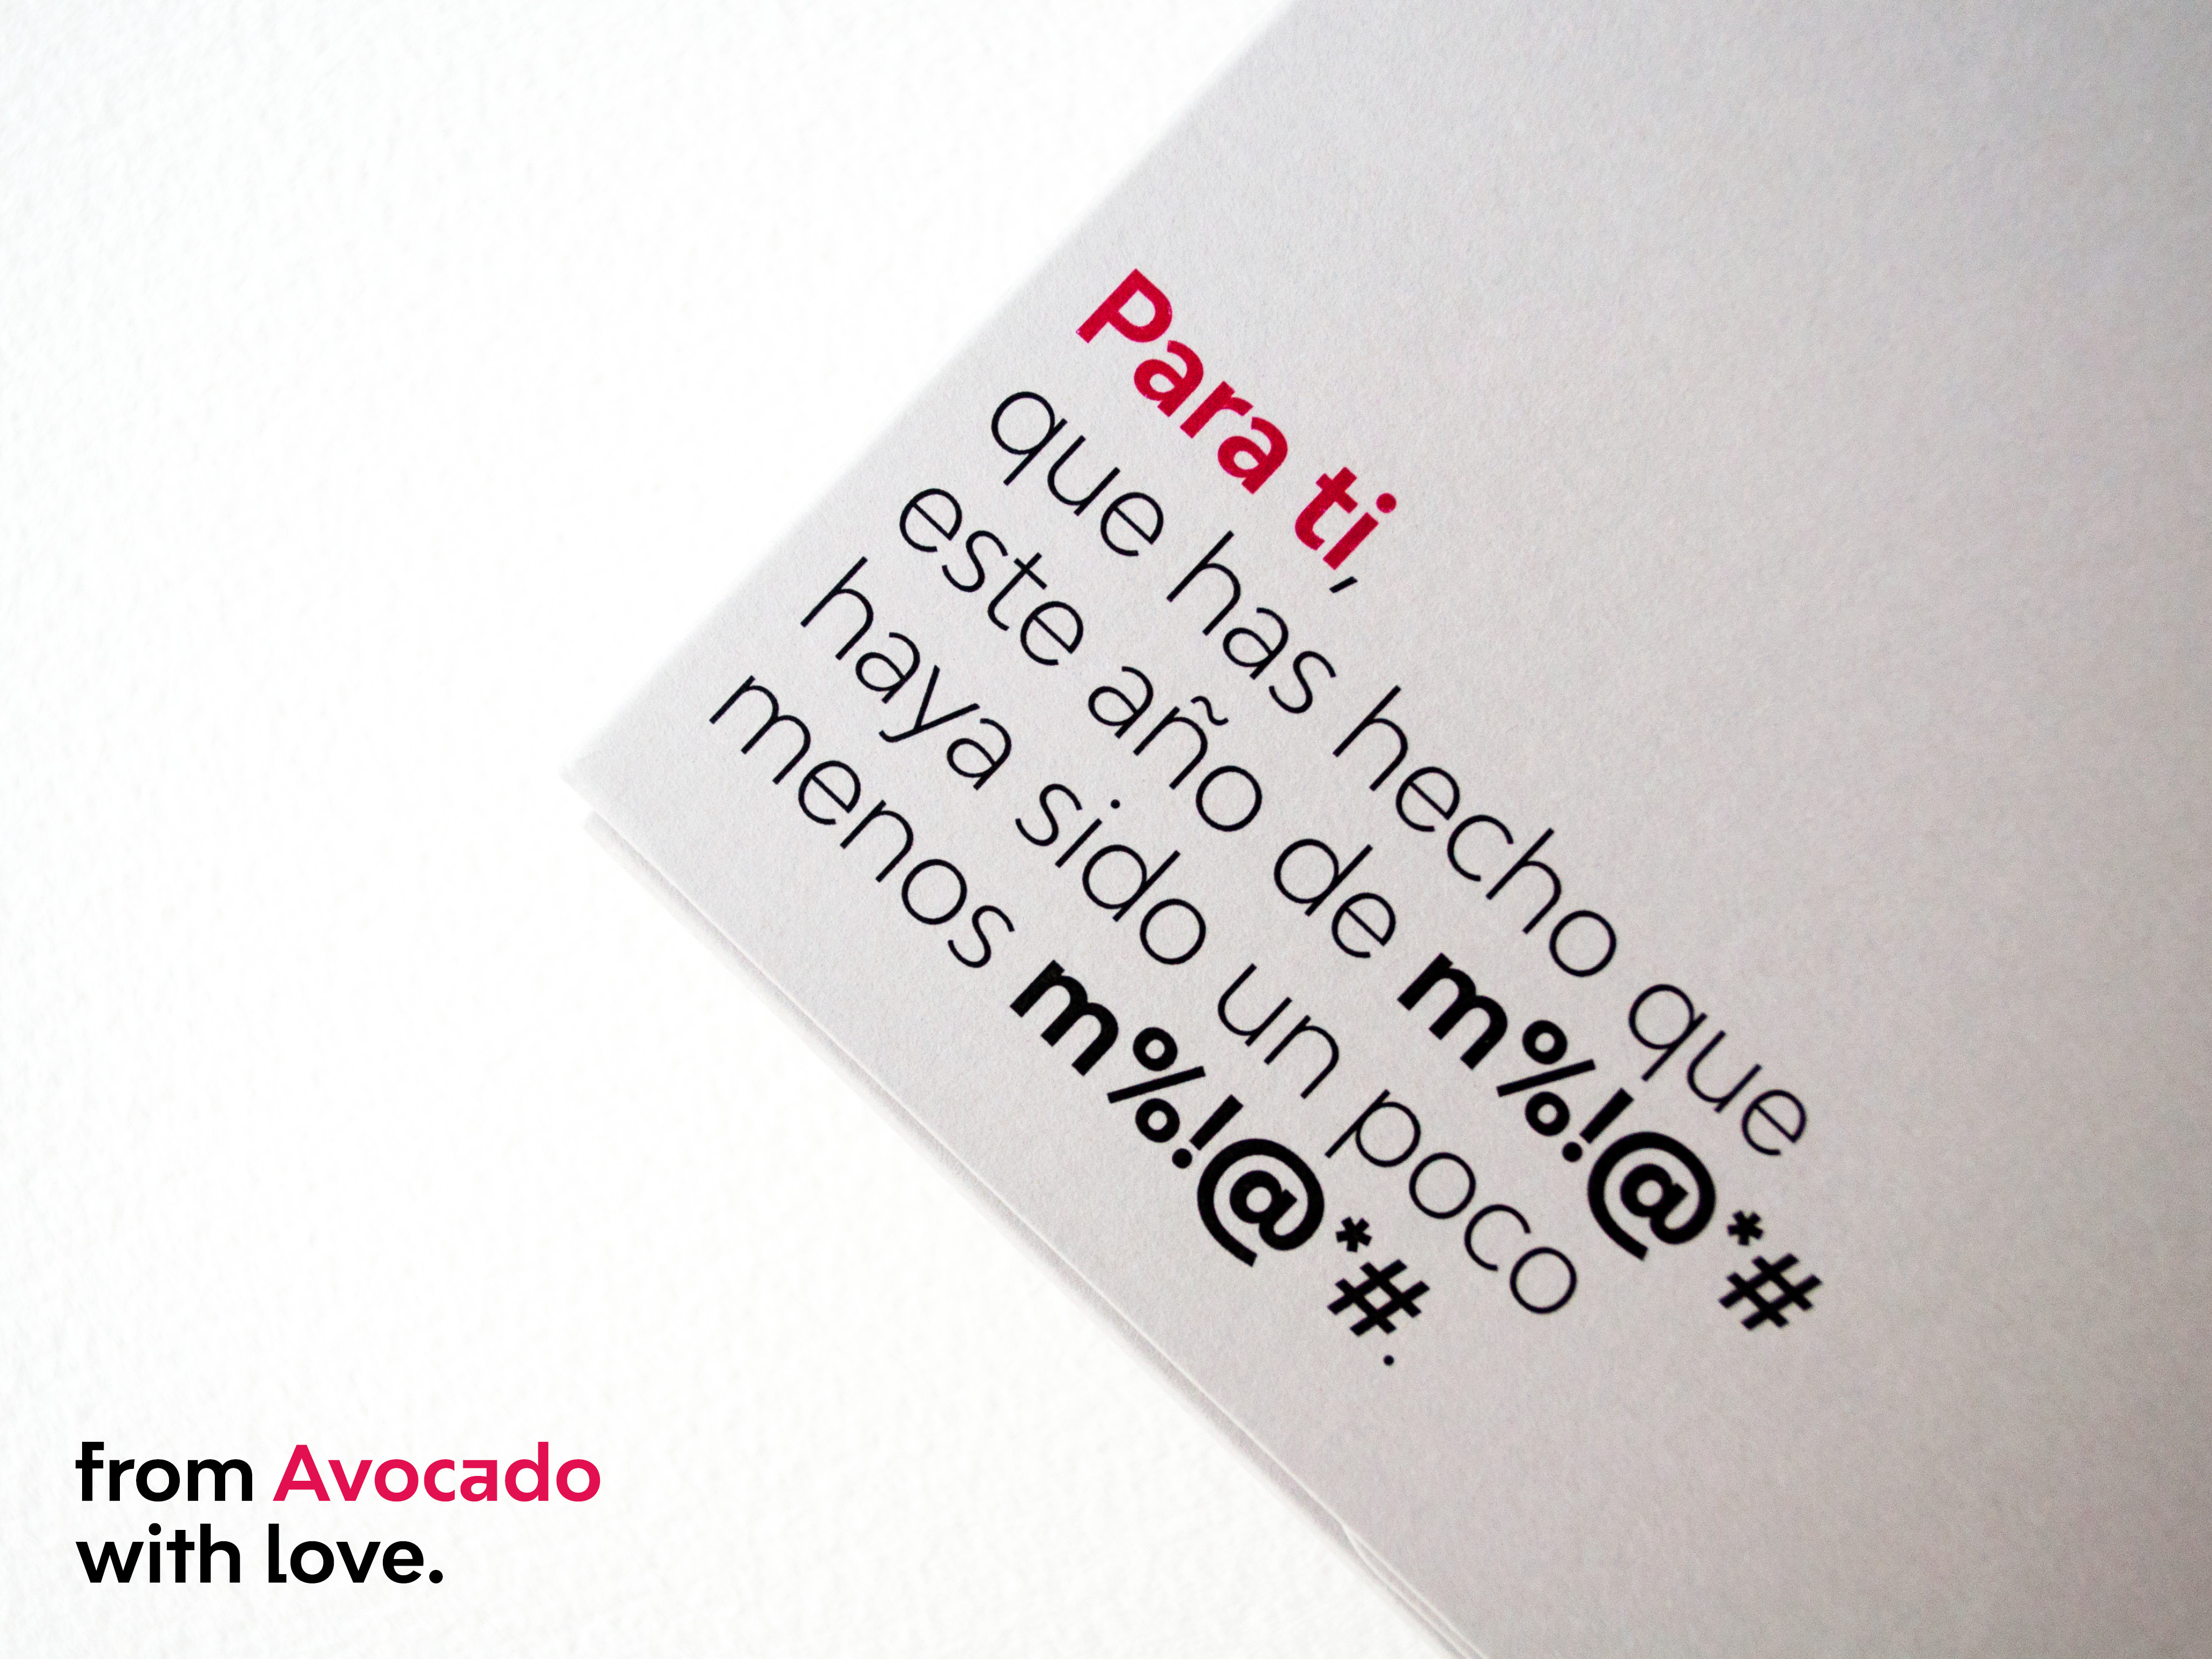 From Avocado with love by Avocado - Creative Work